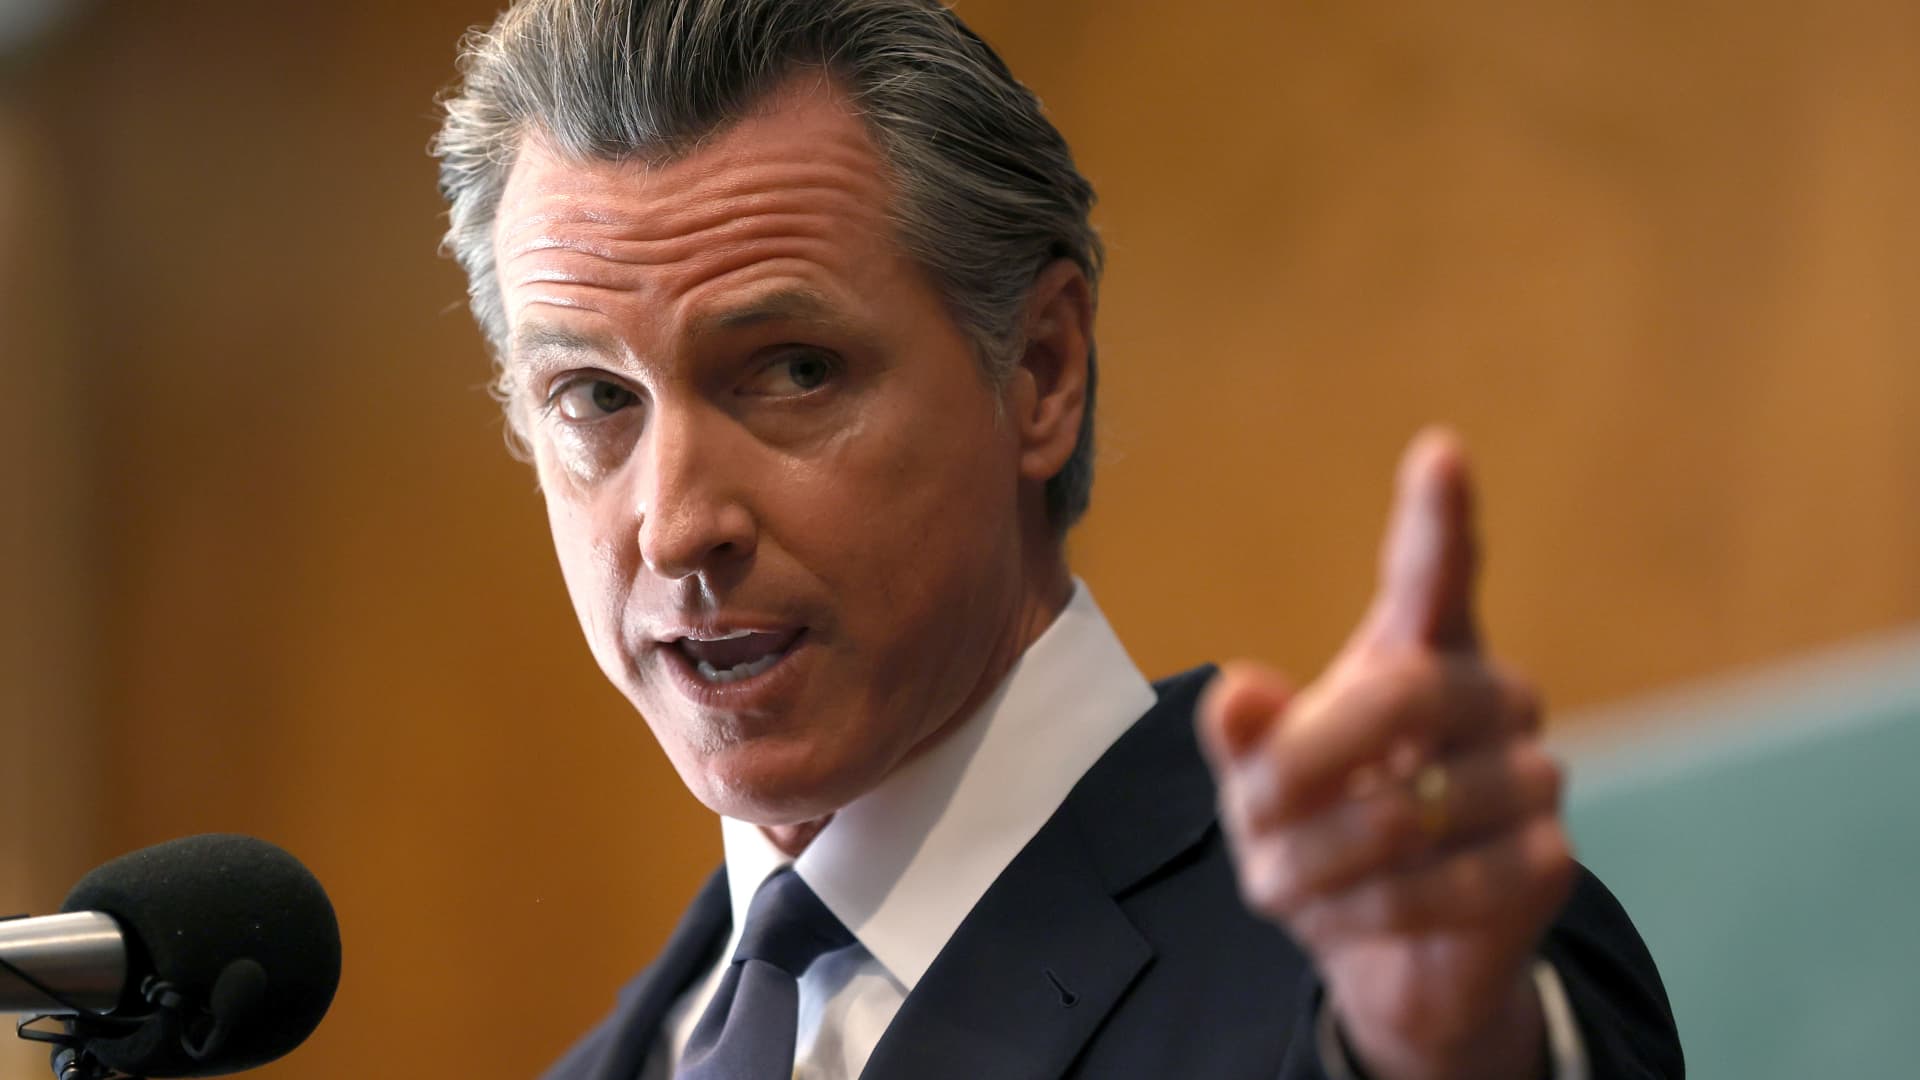 California governor Newsom says state won’t do business with Walgreens